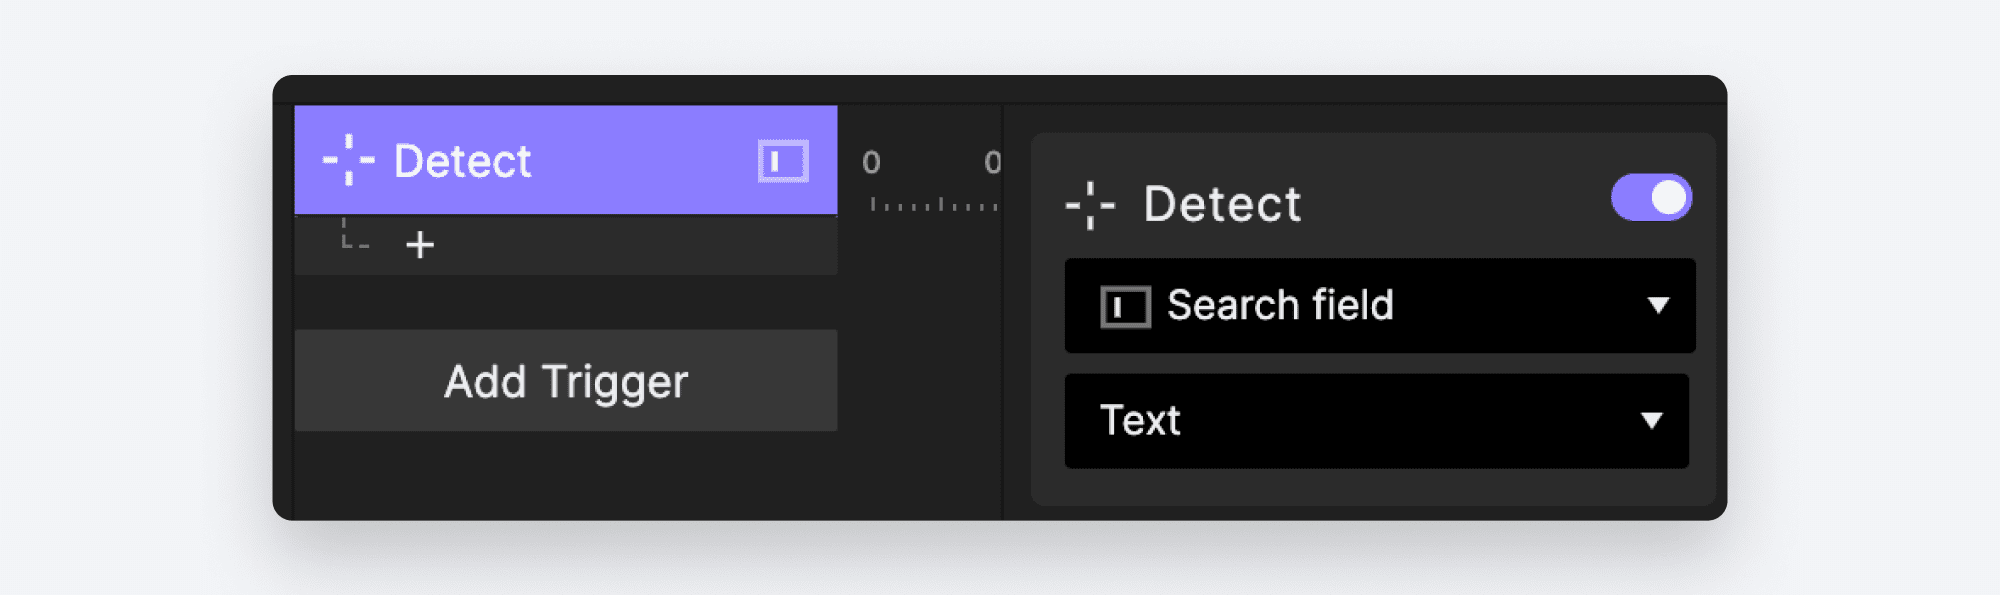 Add a Detect Trigger to the Search Field input layer